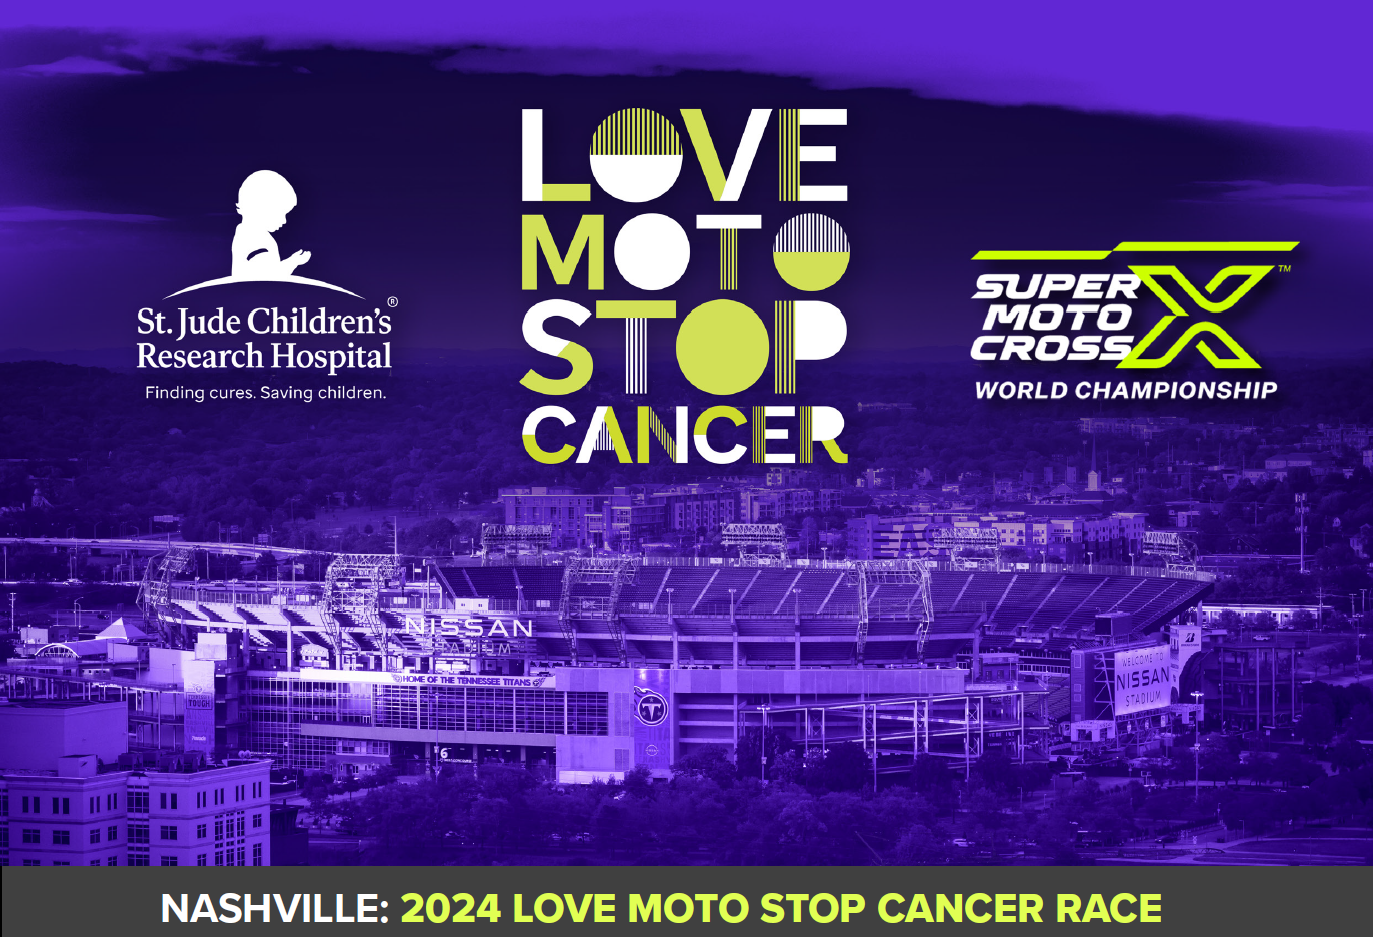 Graphic with St. Jude and SMX logos - messages "Love Moto Stop Cancer Race - Nashville 2024"